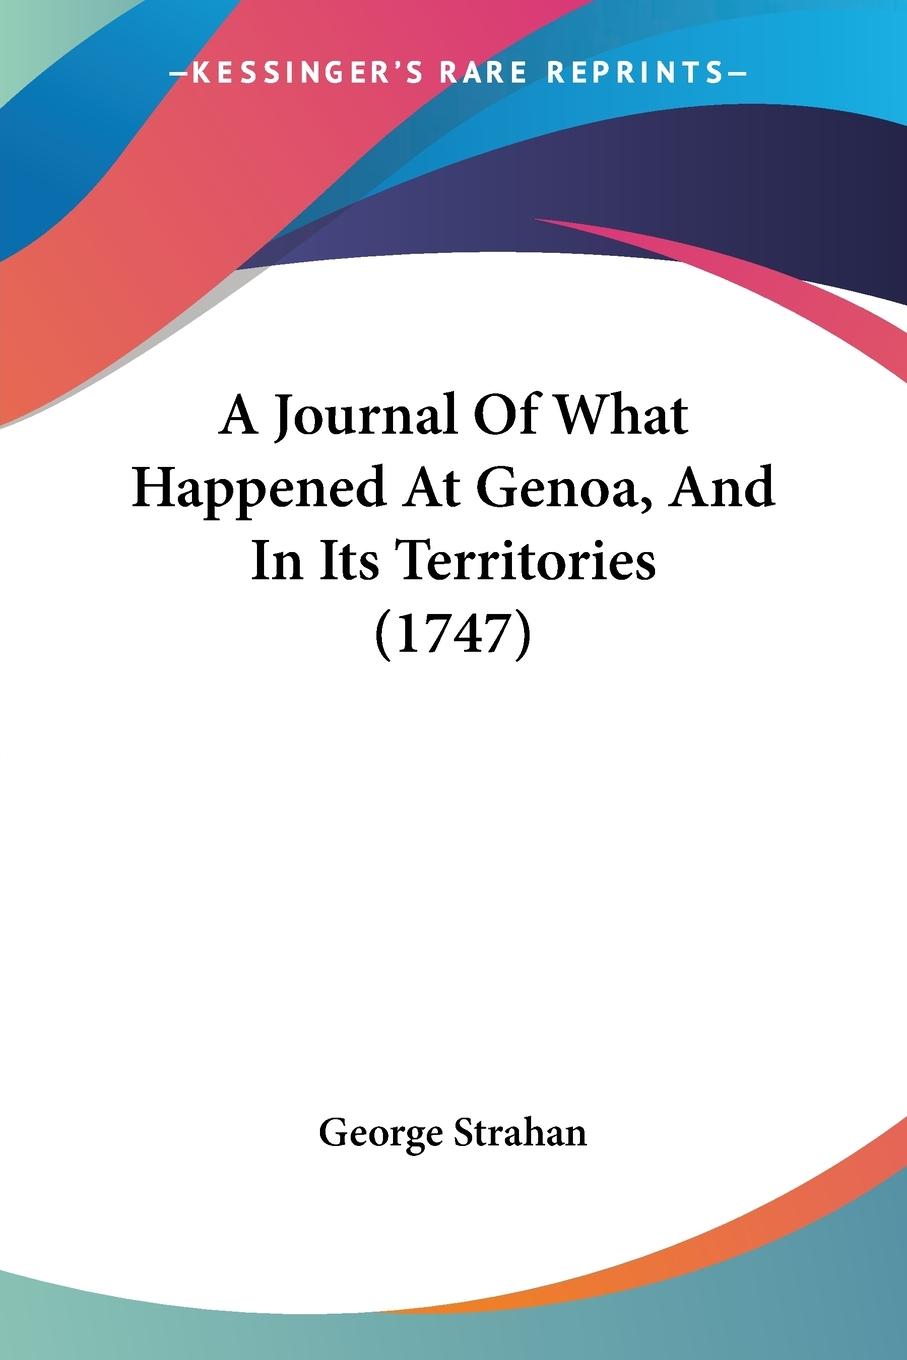 A Journal Of What Happened At Genoa, And In Its Territories (1747) - George Strahan